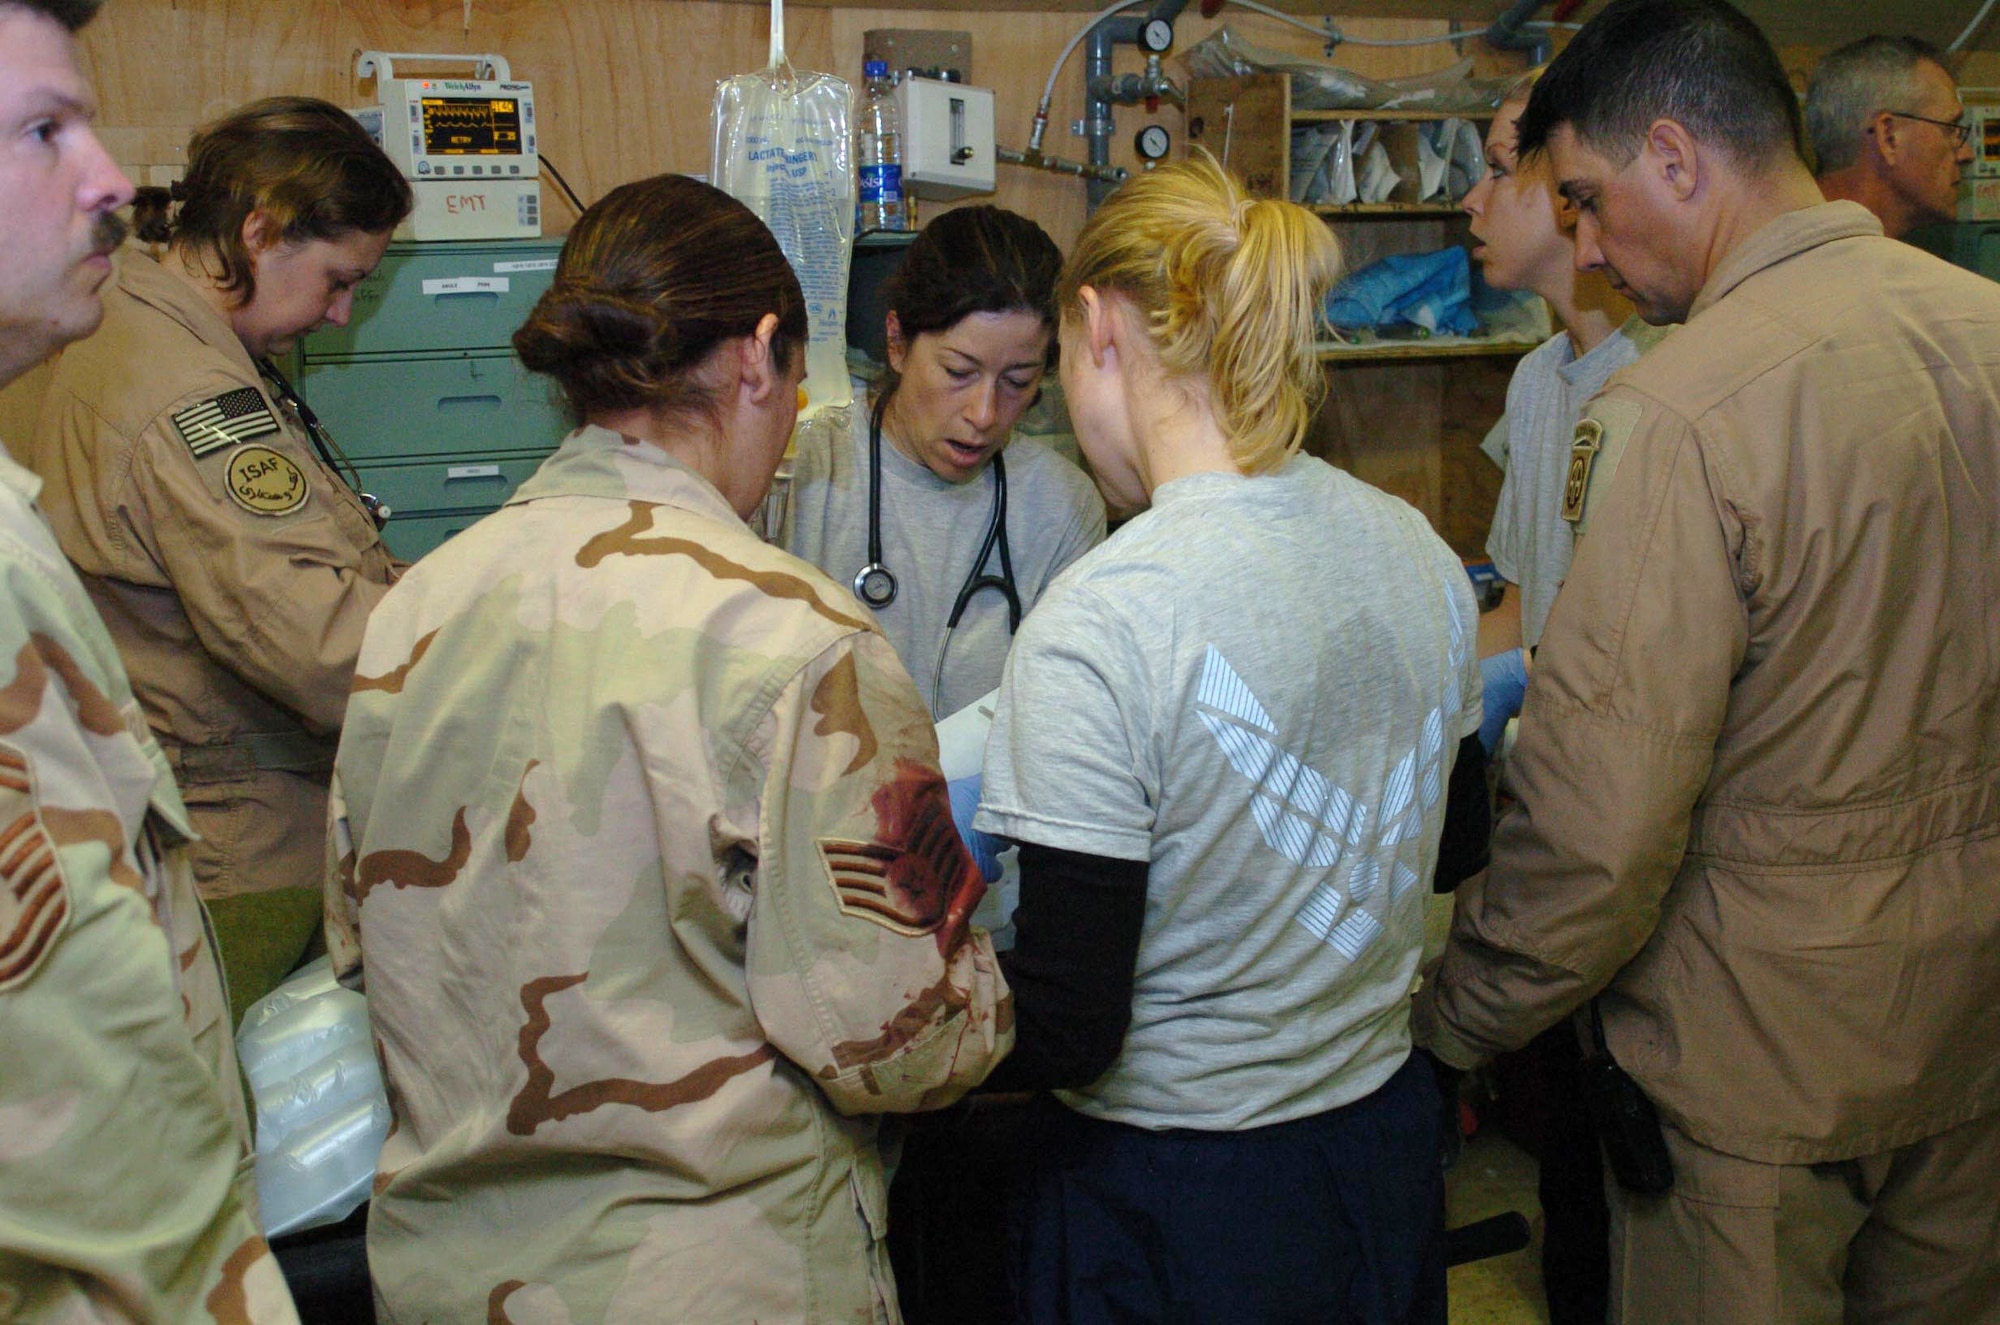 Doctors and nurses at Task Force Med administer life-saving measures on a boy caught in the blast of a suicide bomber's attack Feb. 27.  Vice President Dick Cheney was visiting Bagram Air Base, Afghanistan, when a suicide bomber self-detonated outside a base entry control point.  (U.S. Air Force photo/Staff Sgt. Thomas J. Doscher)